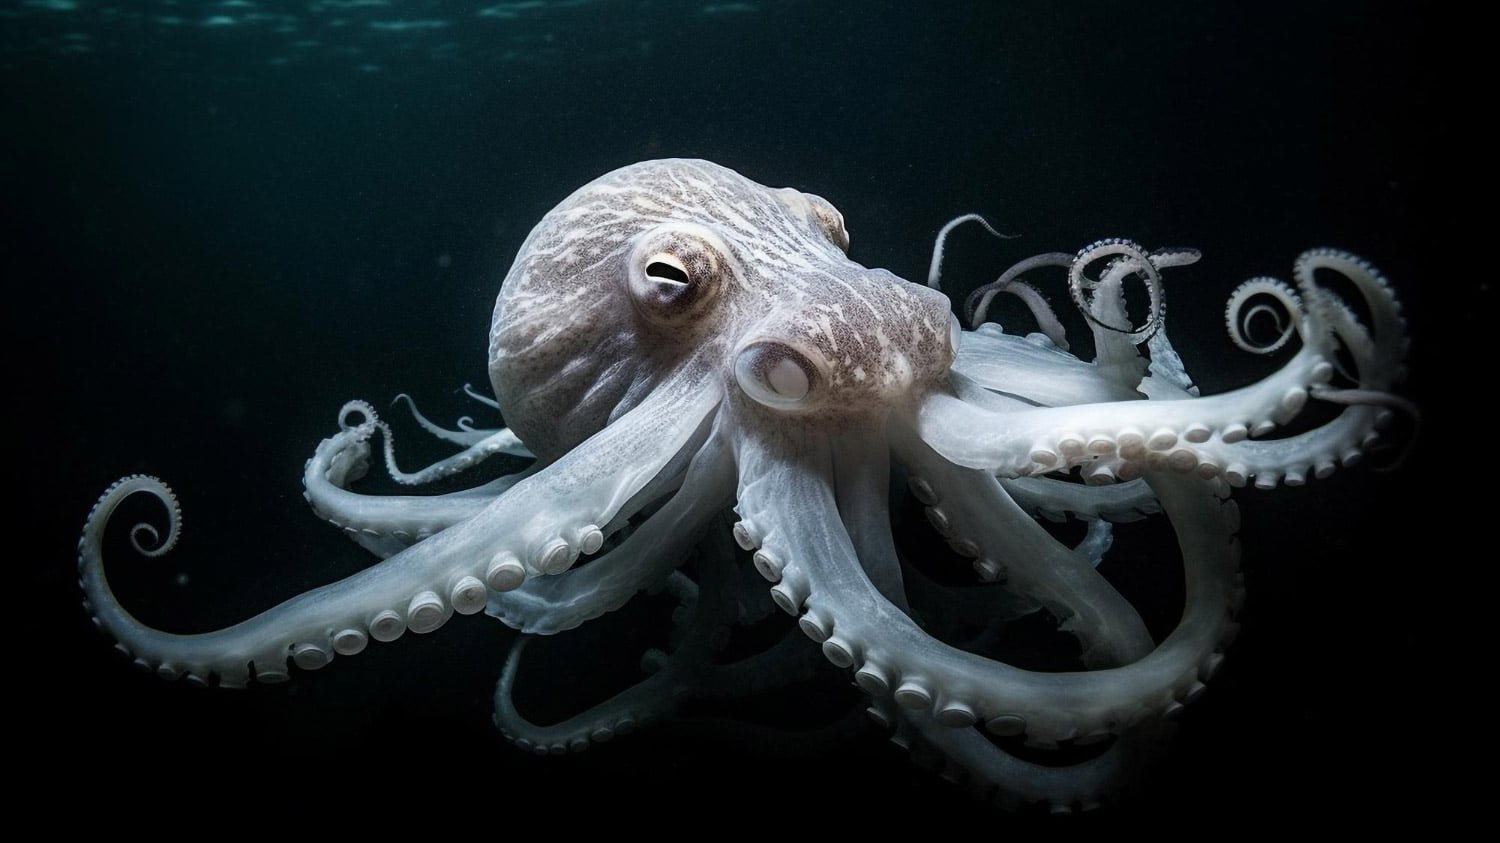 Octopus sleep is surprisingly related to folks, see